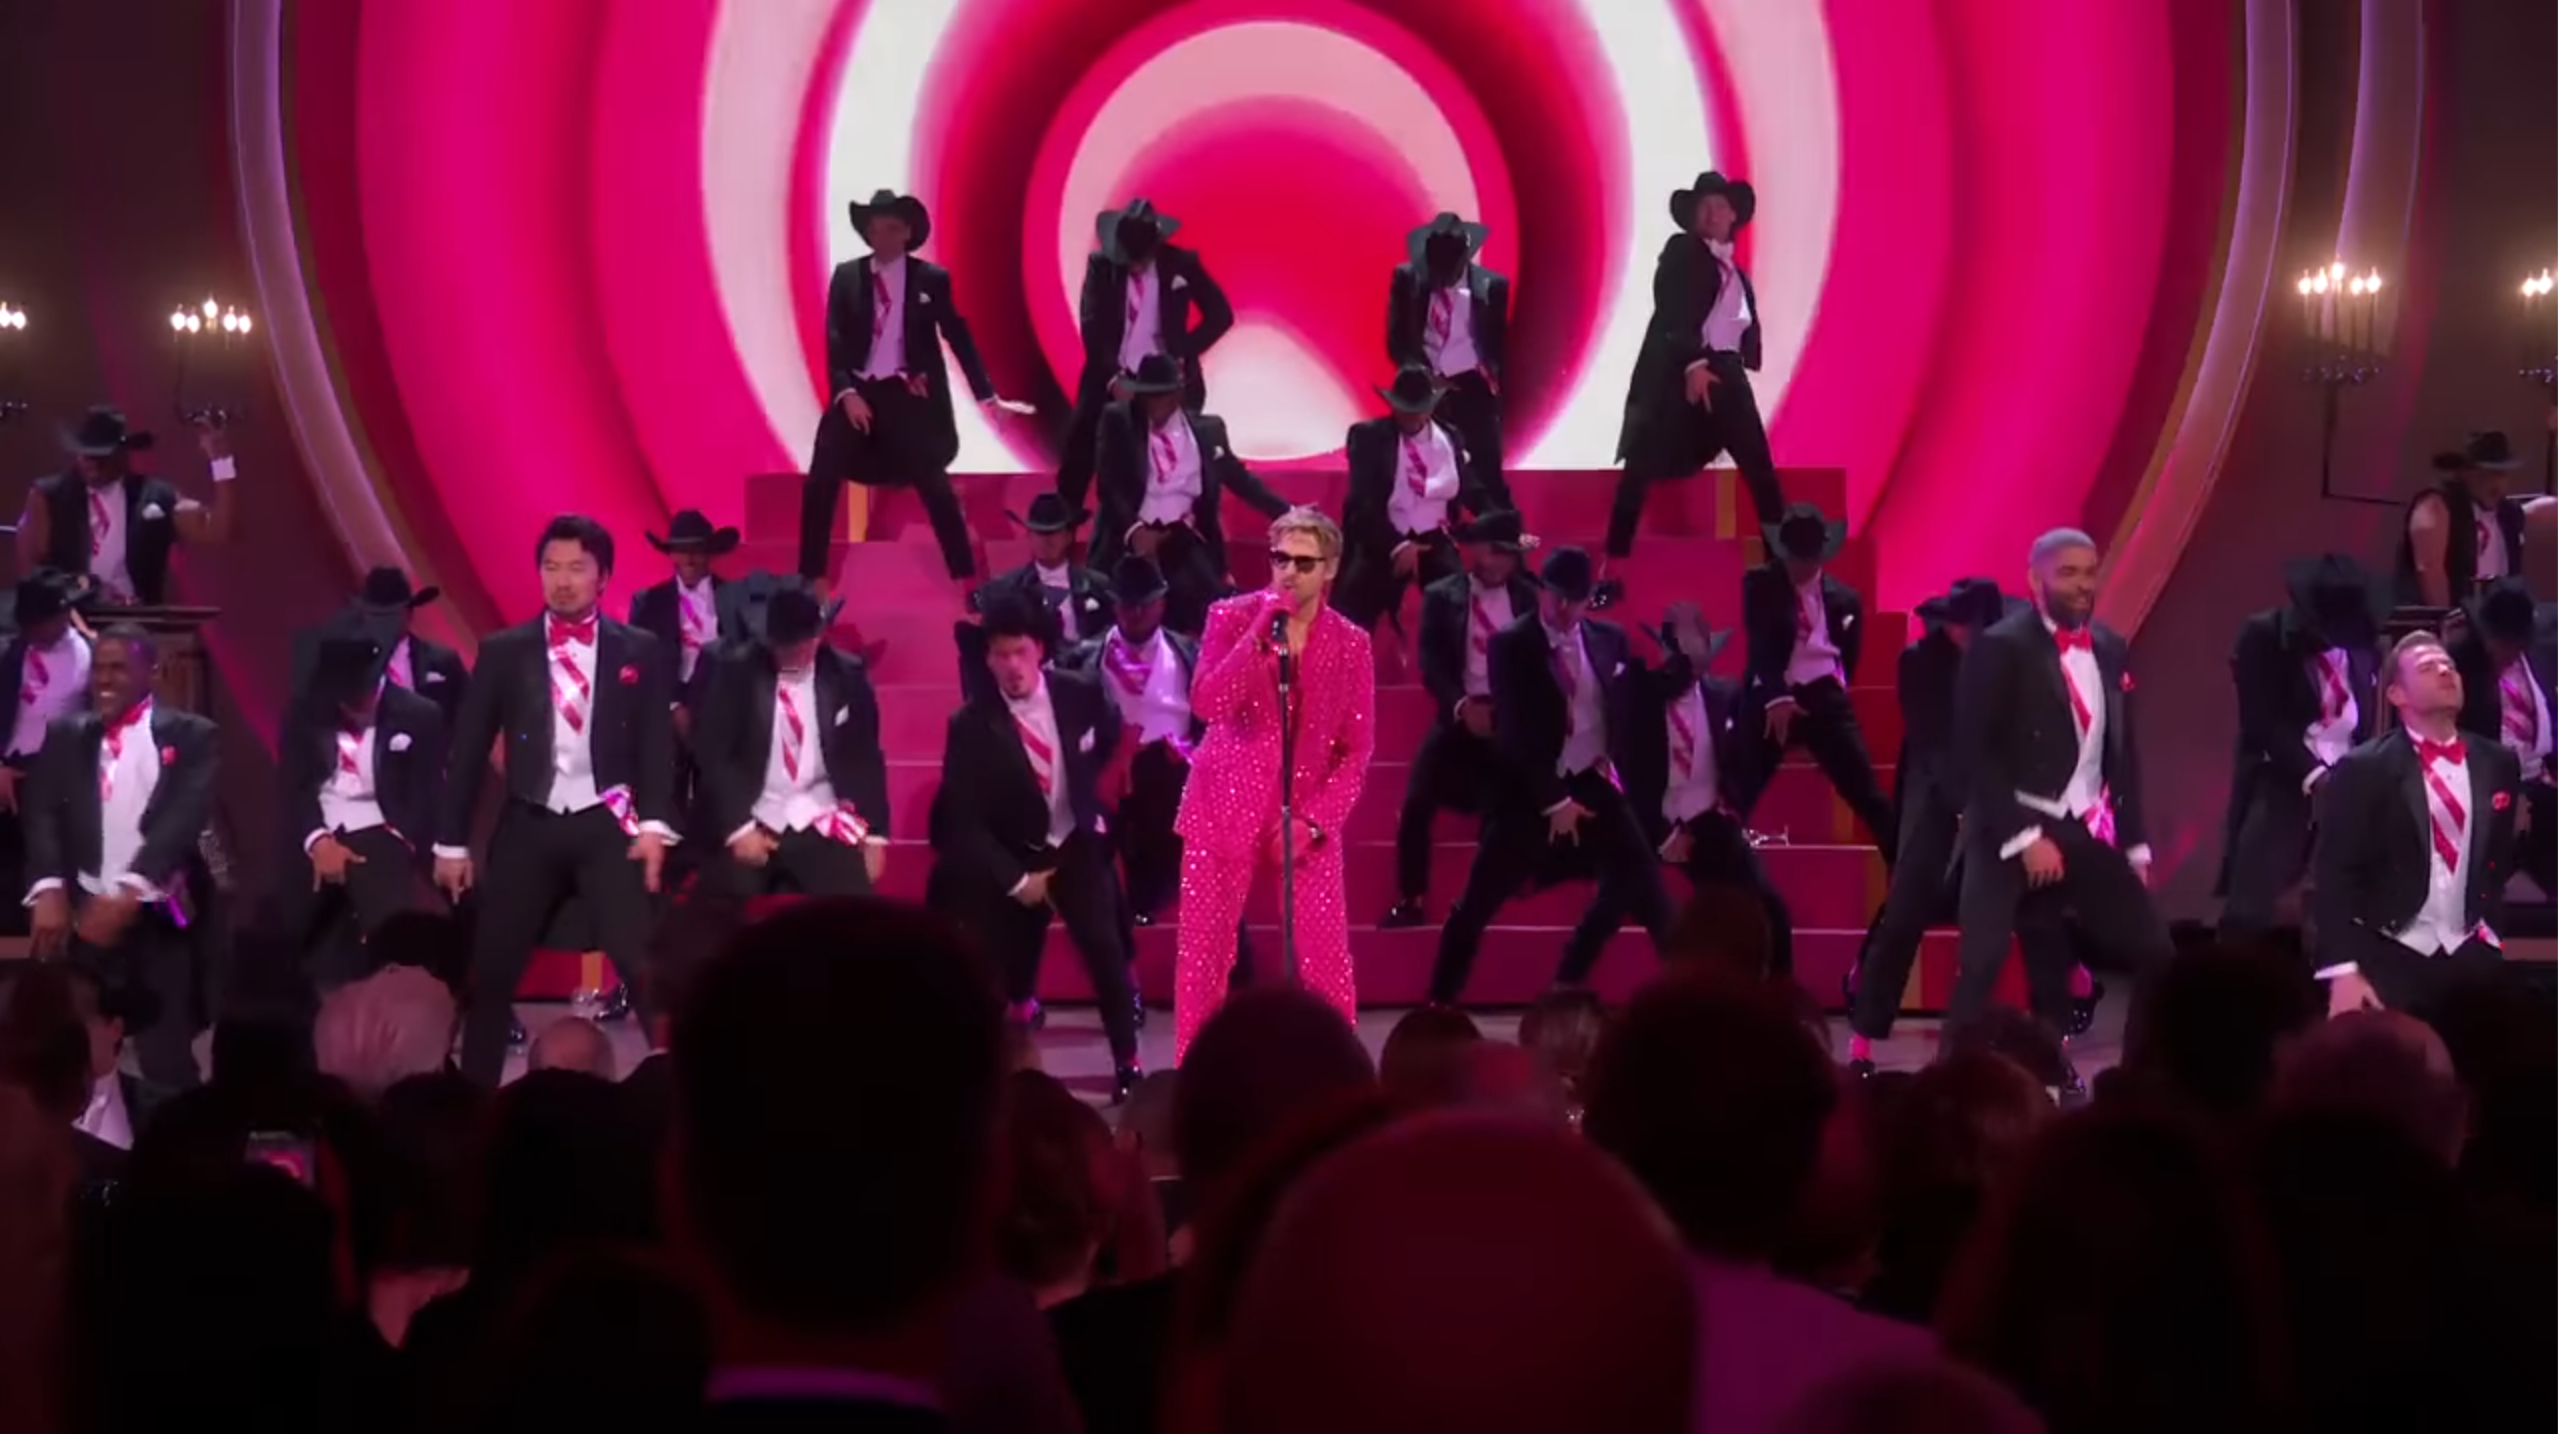 Ryan Gosling’s “I’m Just Ken” Performance at the 2024 Academy Awards ceremony